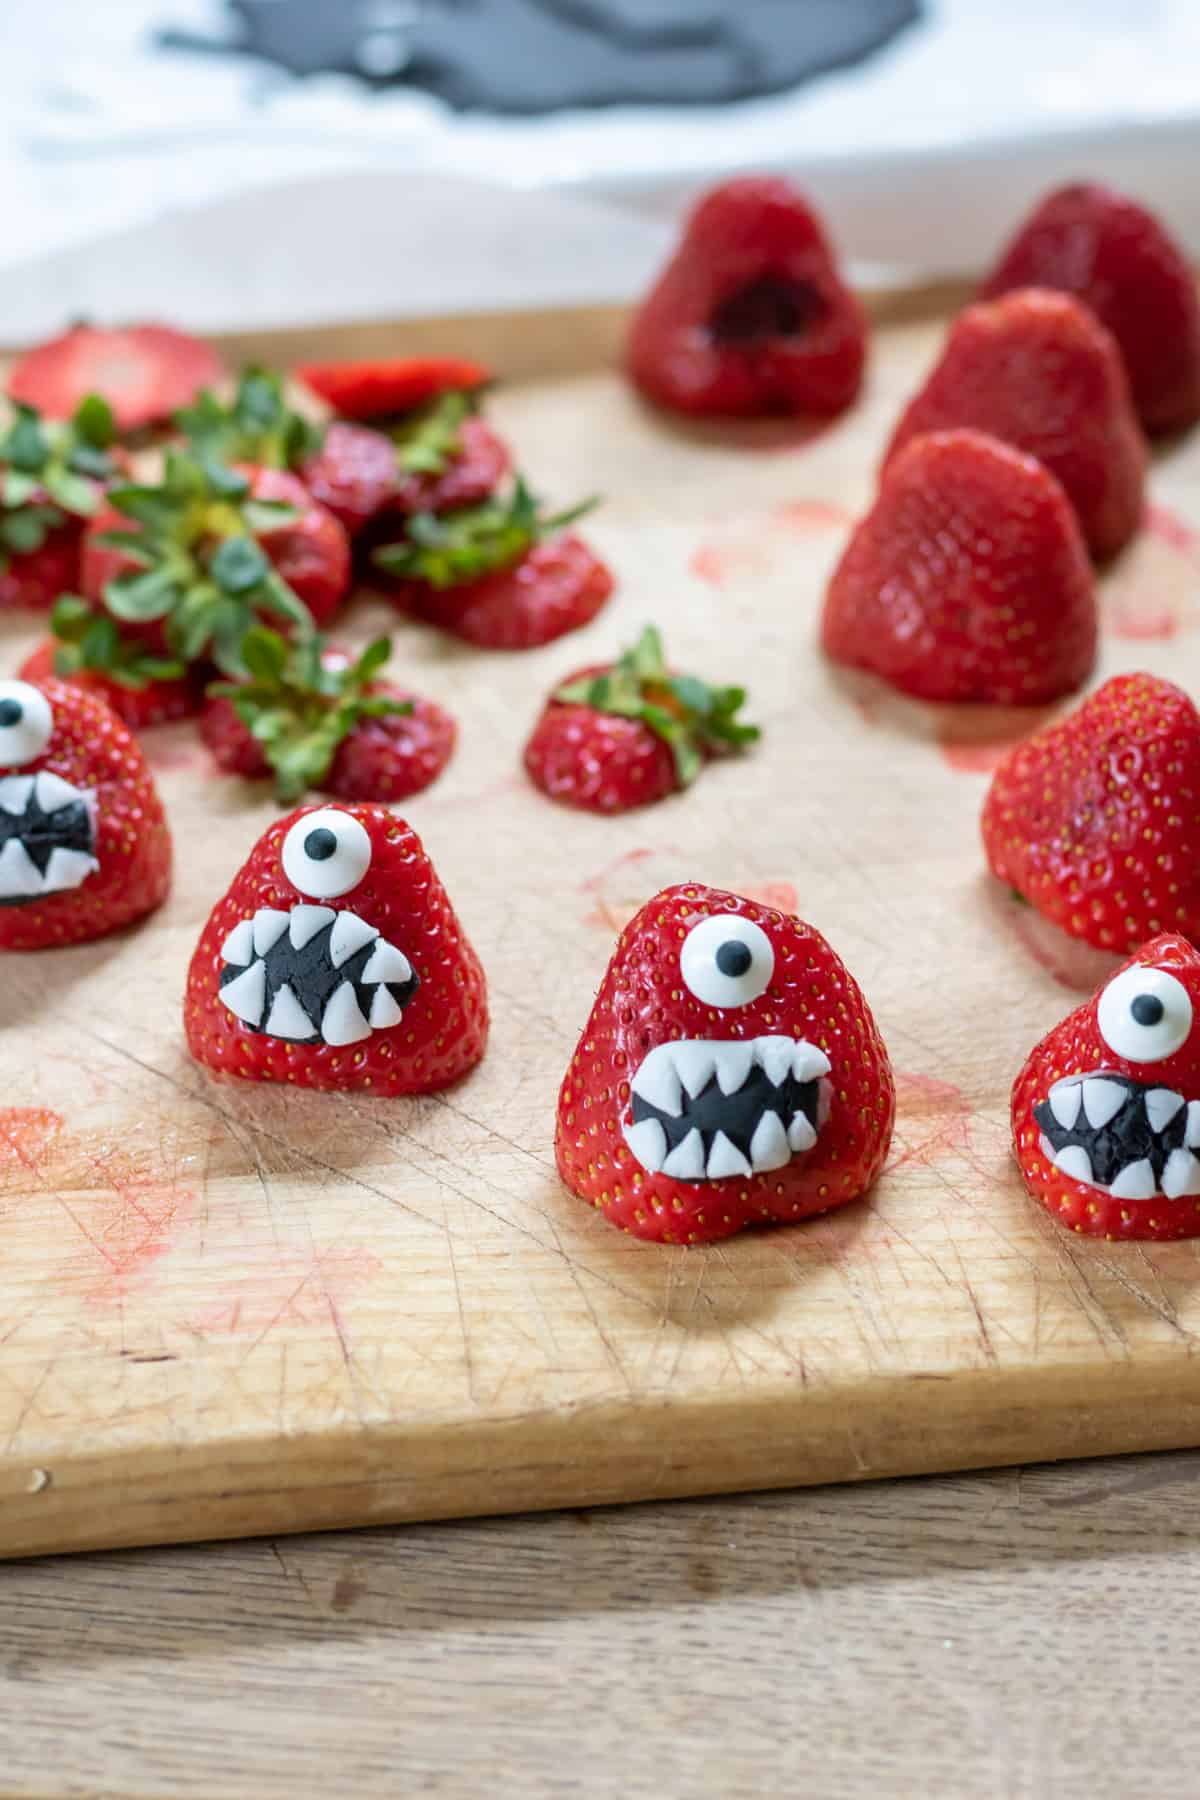 Decorating strawberries to look like monsters.